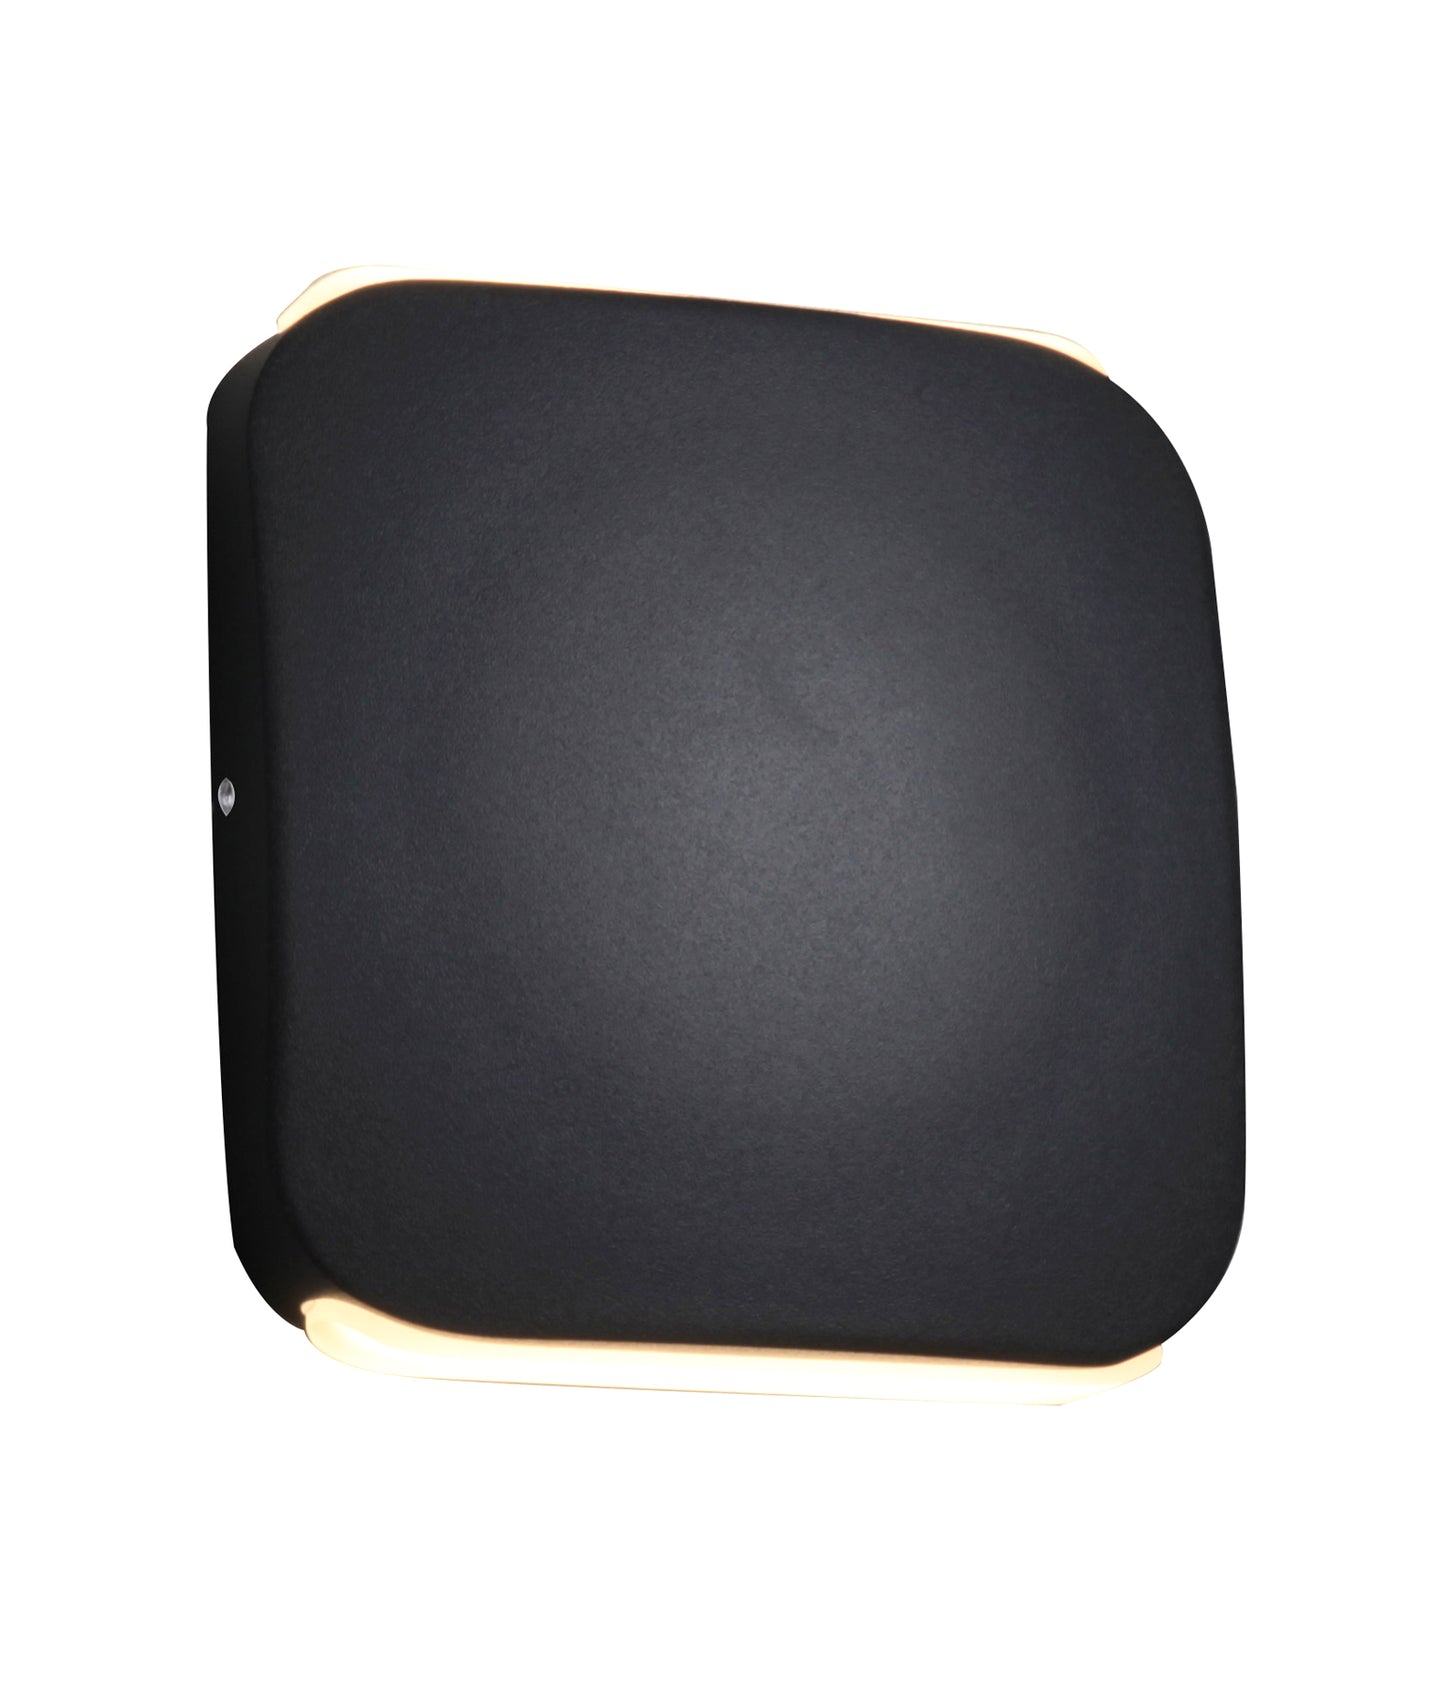 VOX: Surface Mounted LED Exterior Square Up/Down Wall Lights IP54